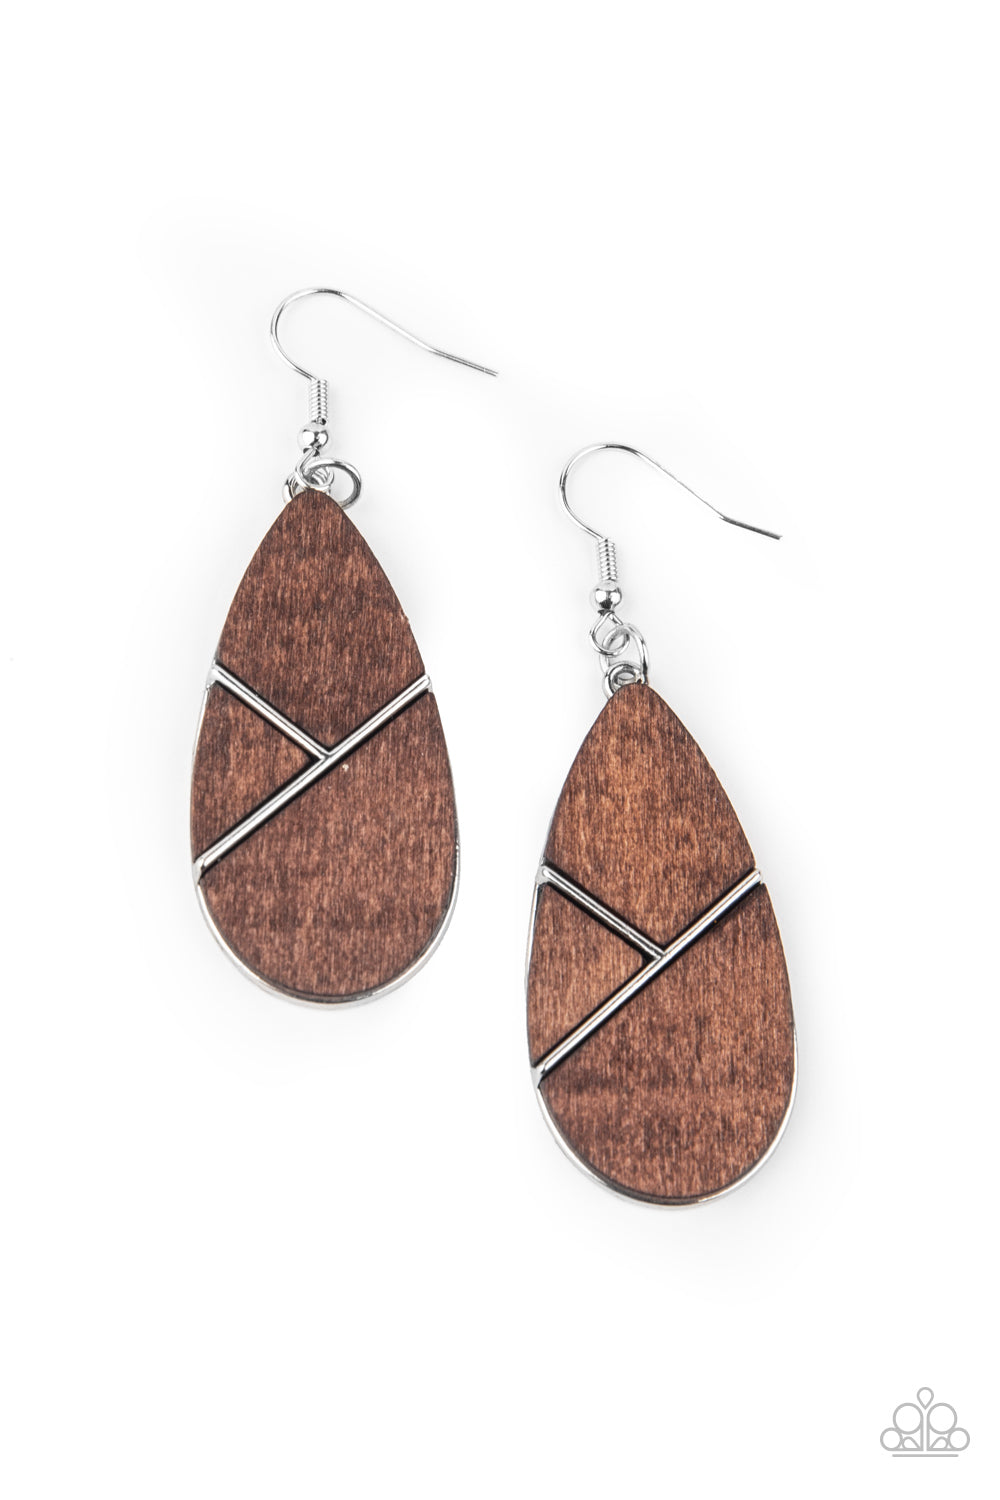 Sequoia Forest - Brown Earrings